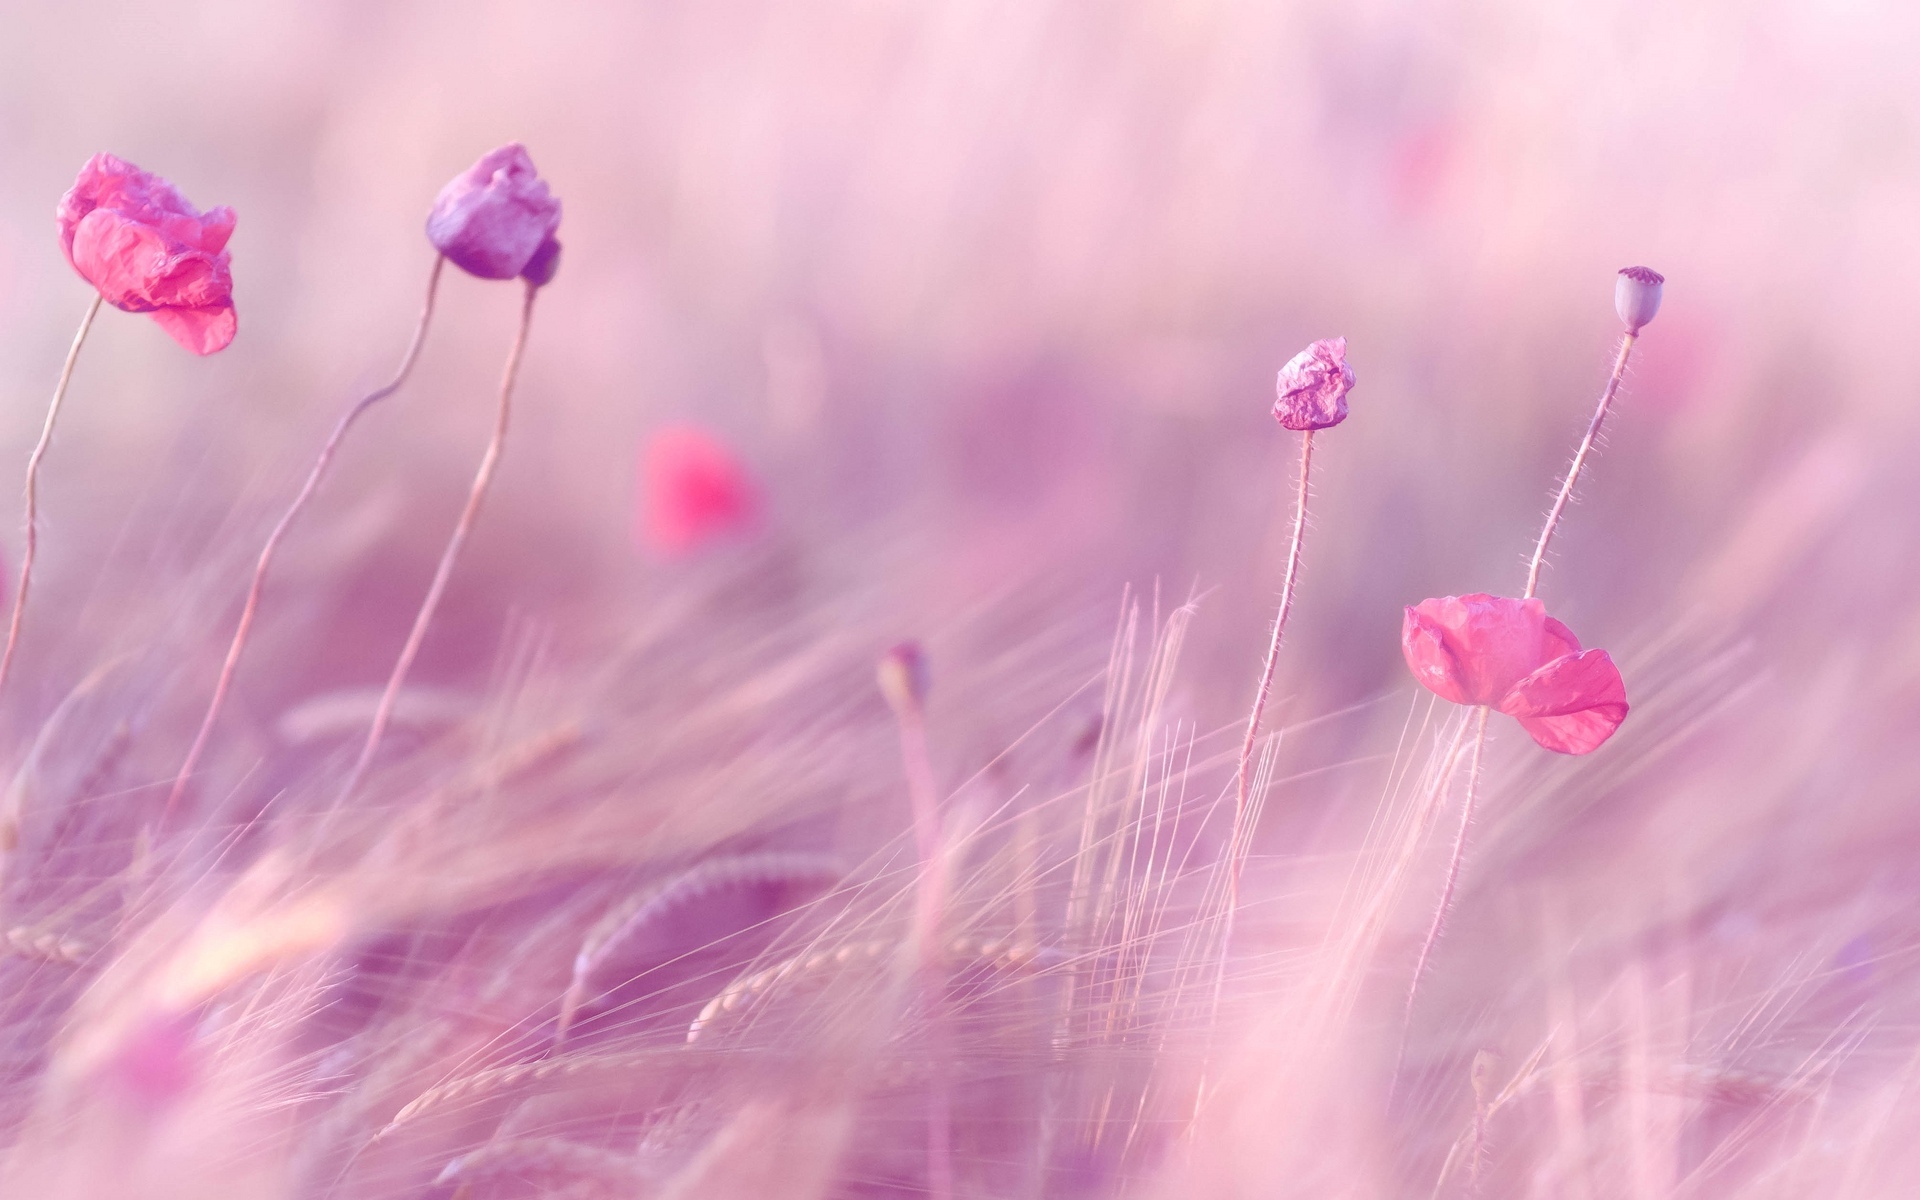 [59+] Pink And Purple Flower Backgrounds | WallpaperSafari.com